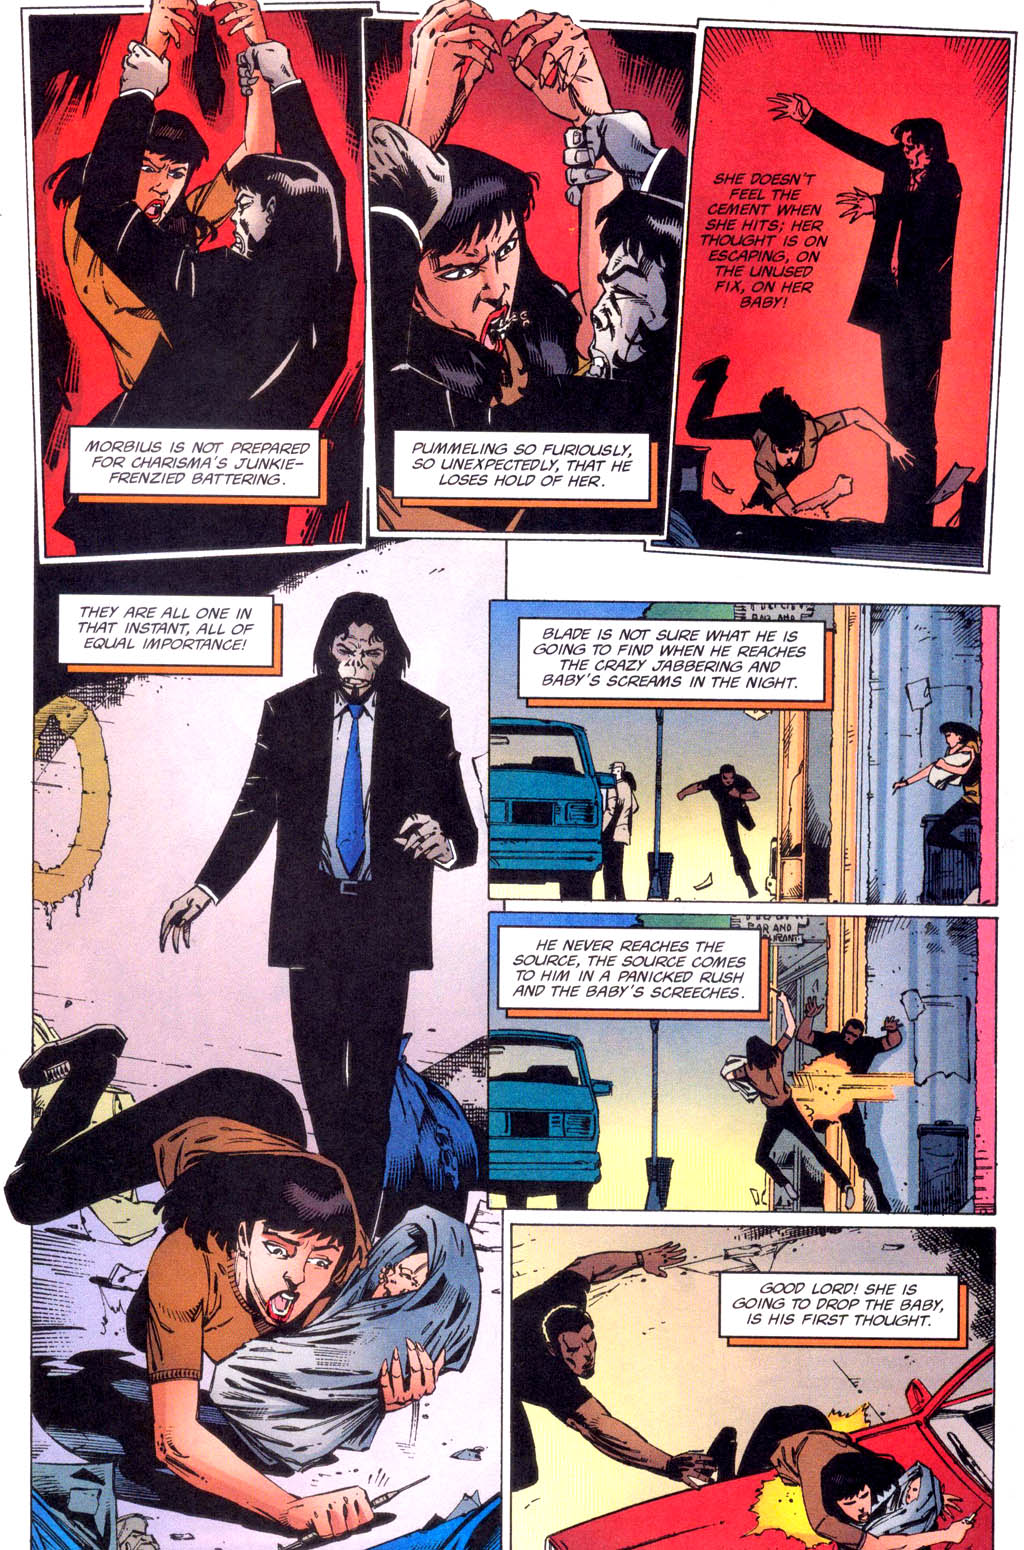 Blade (1998) 3 Page 19